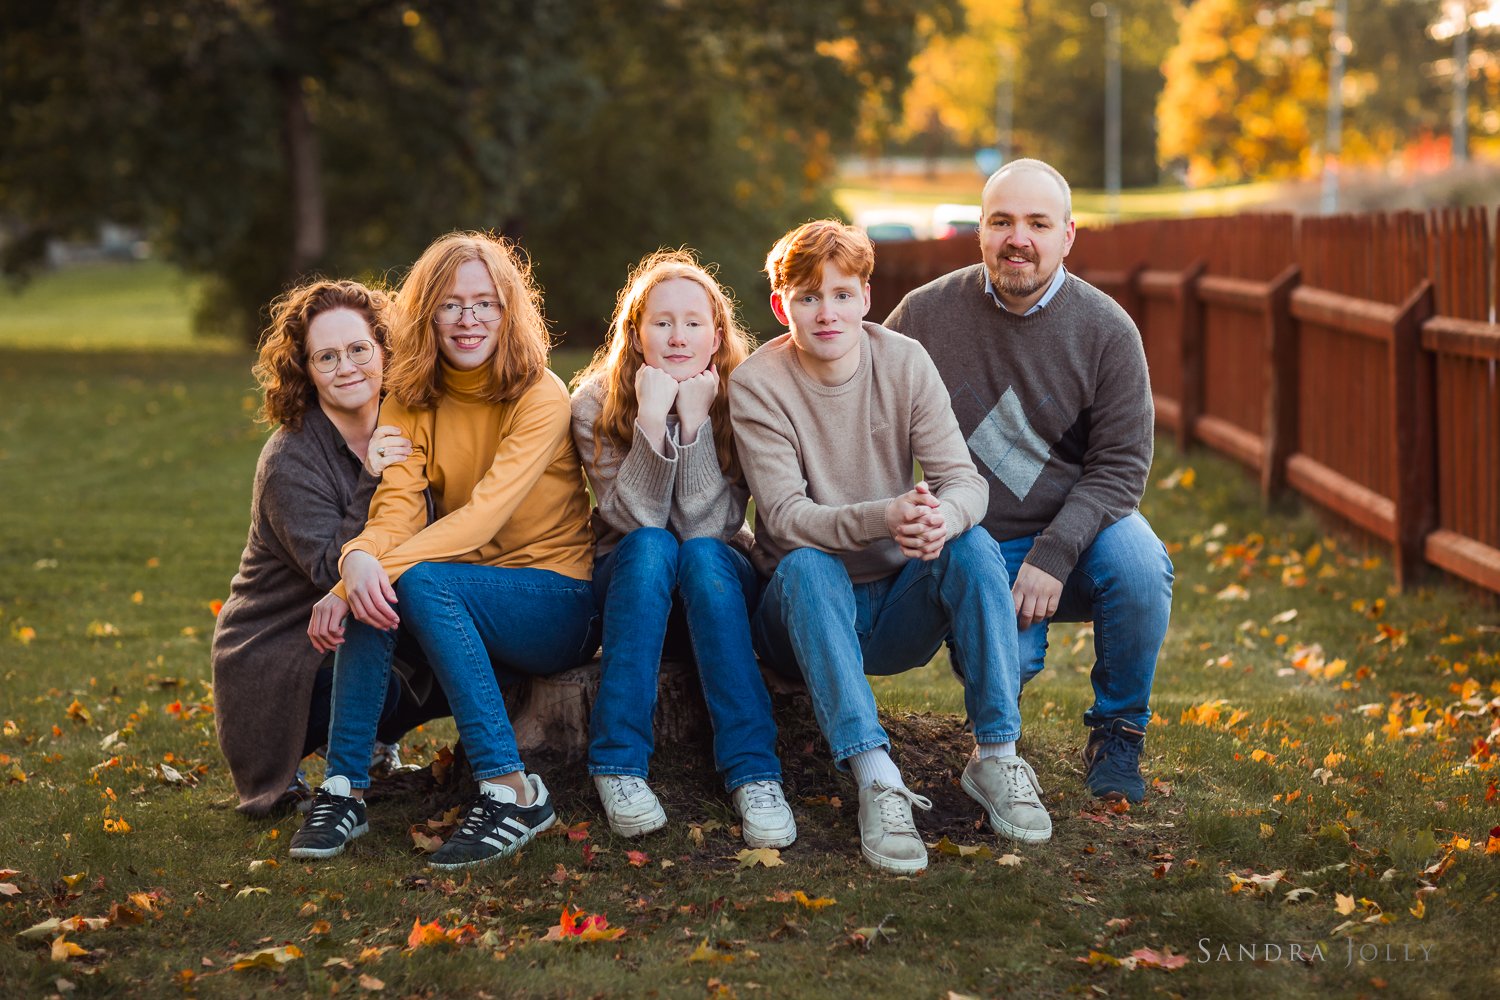 icelandic-family-photo-session-in-stockholm-by-sandra-jolly-photography.jpg